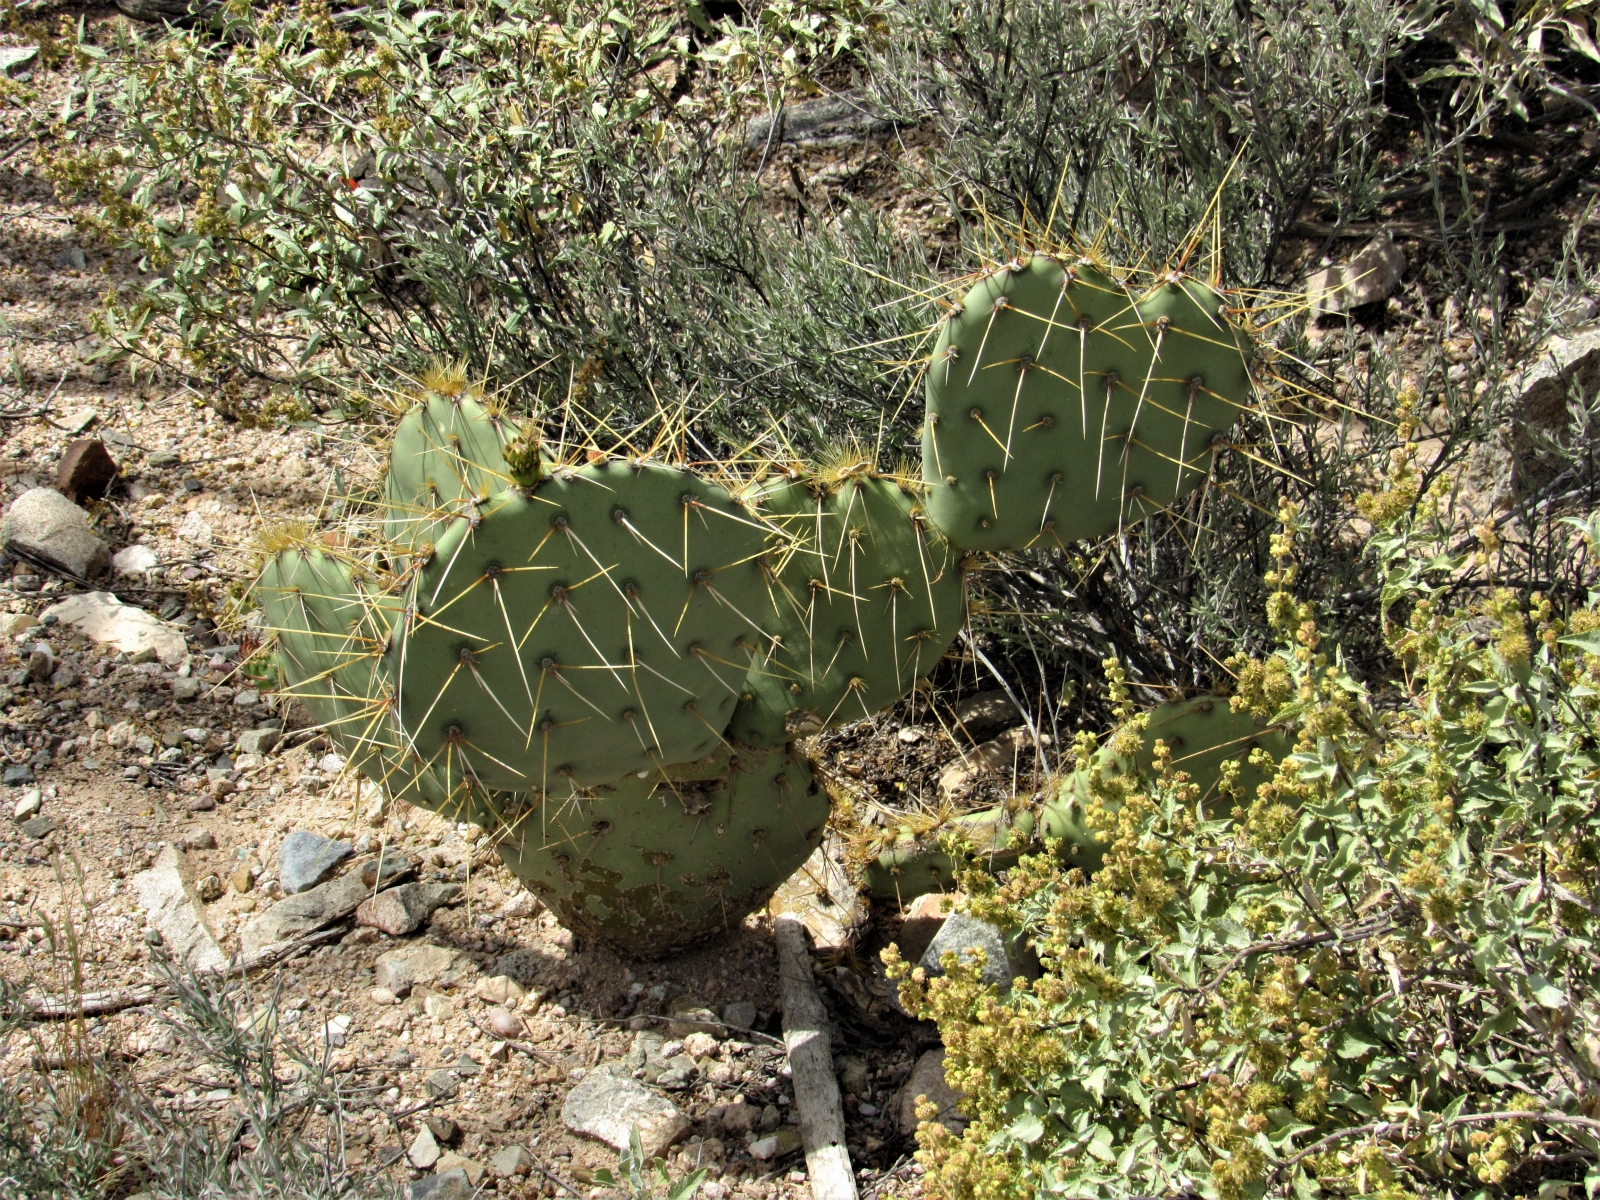 Prickly-pear